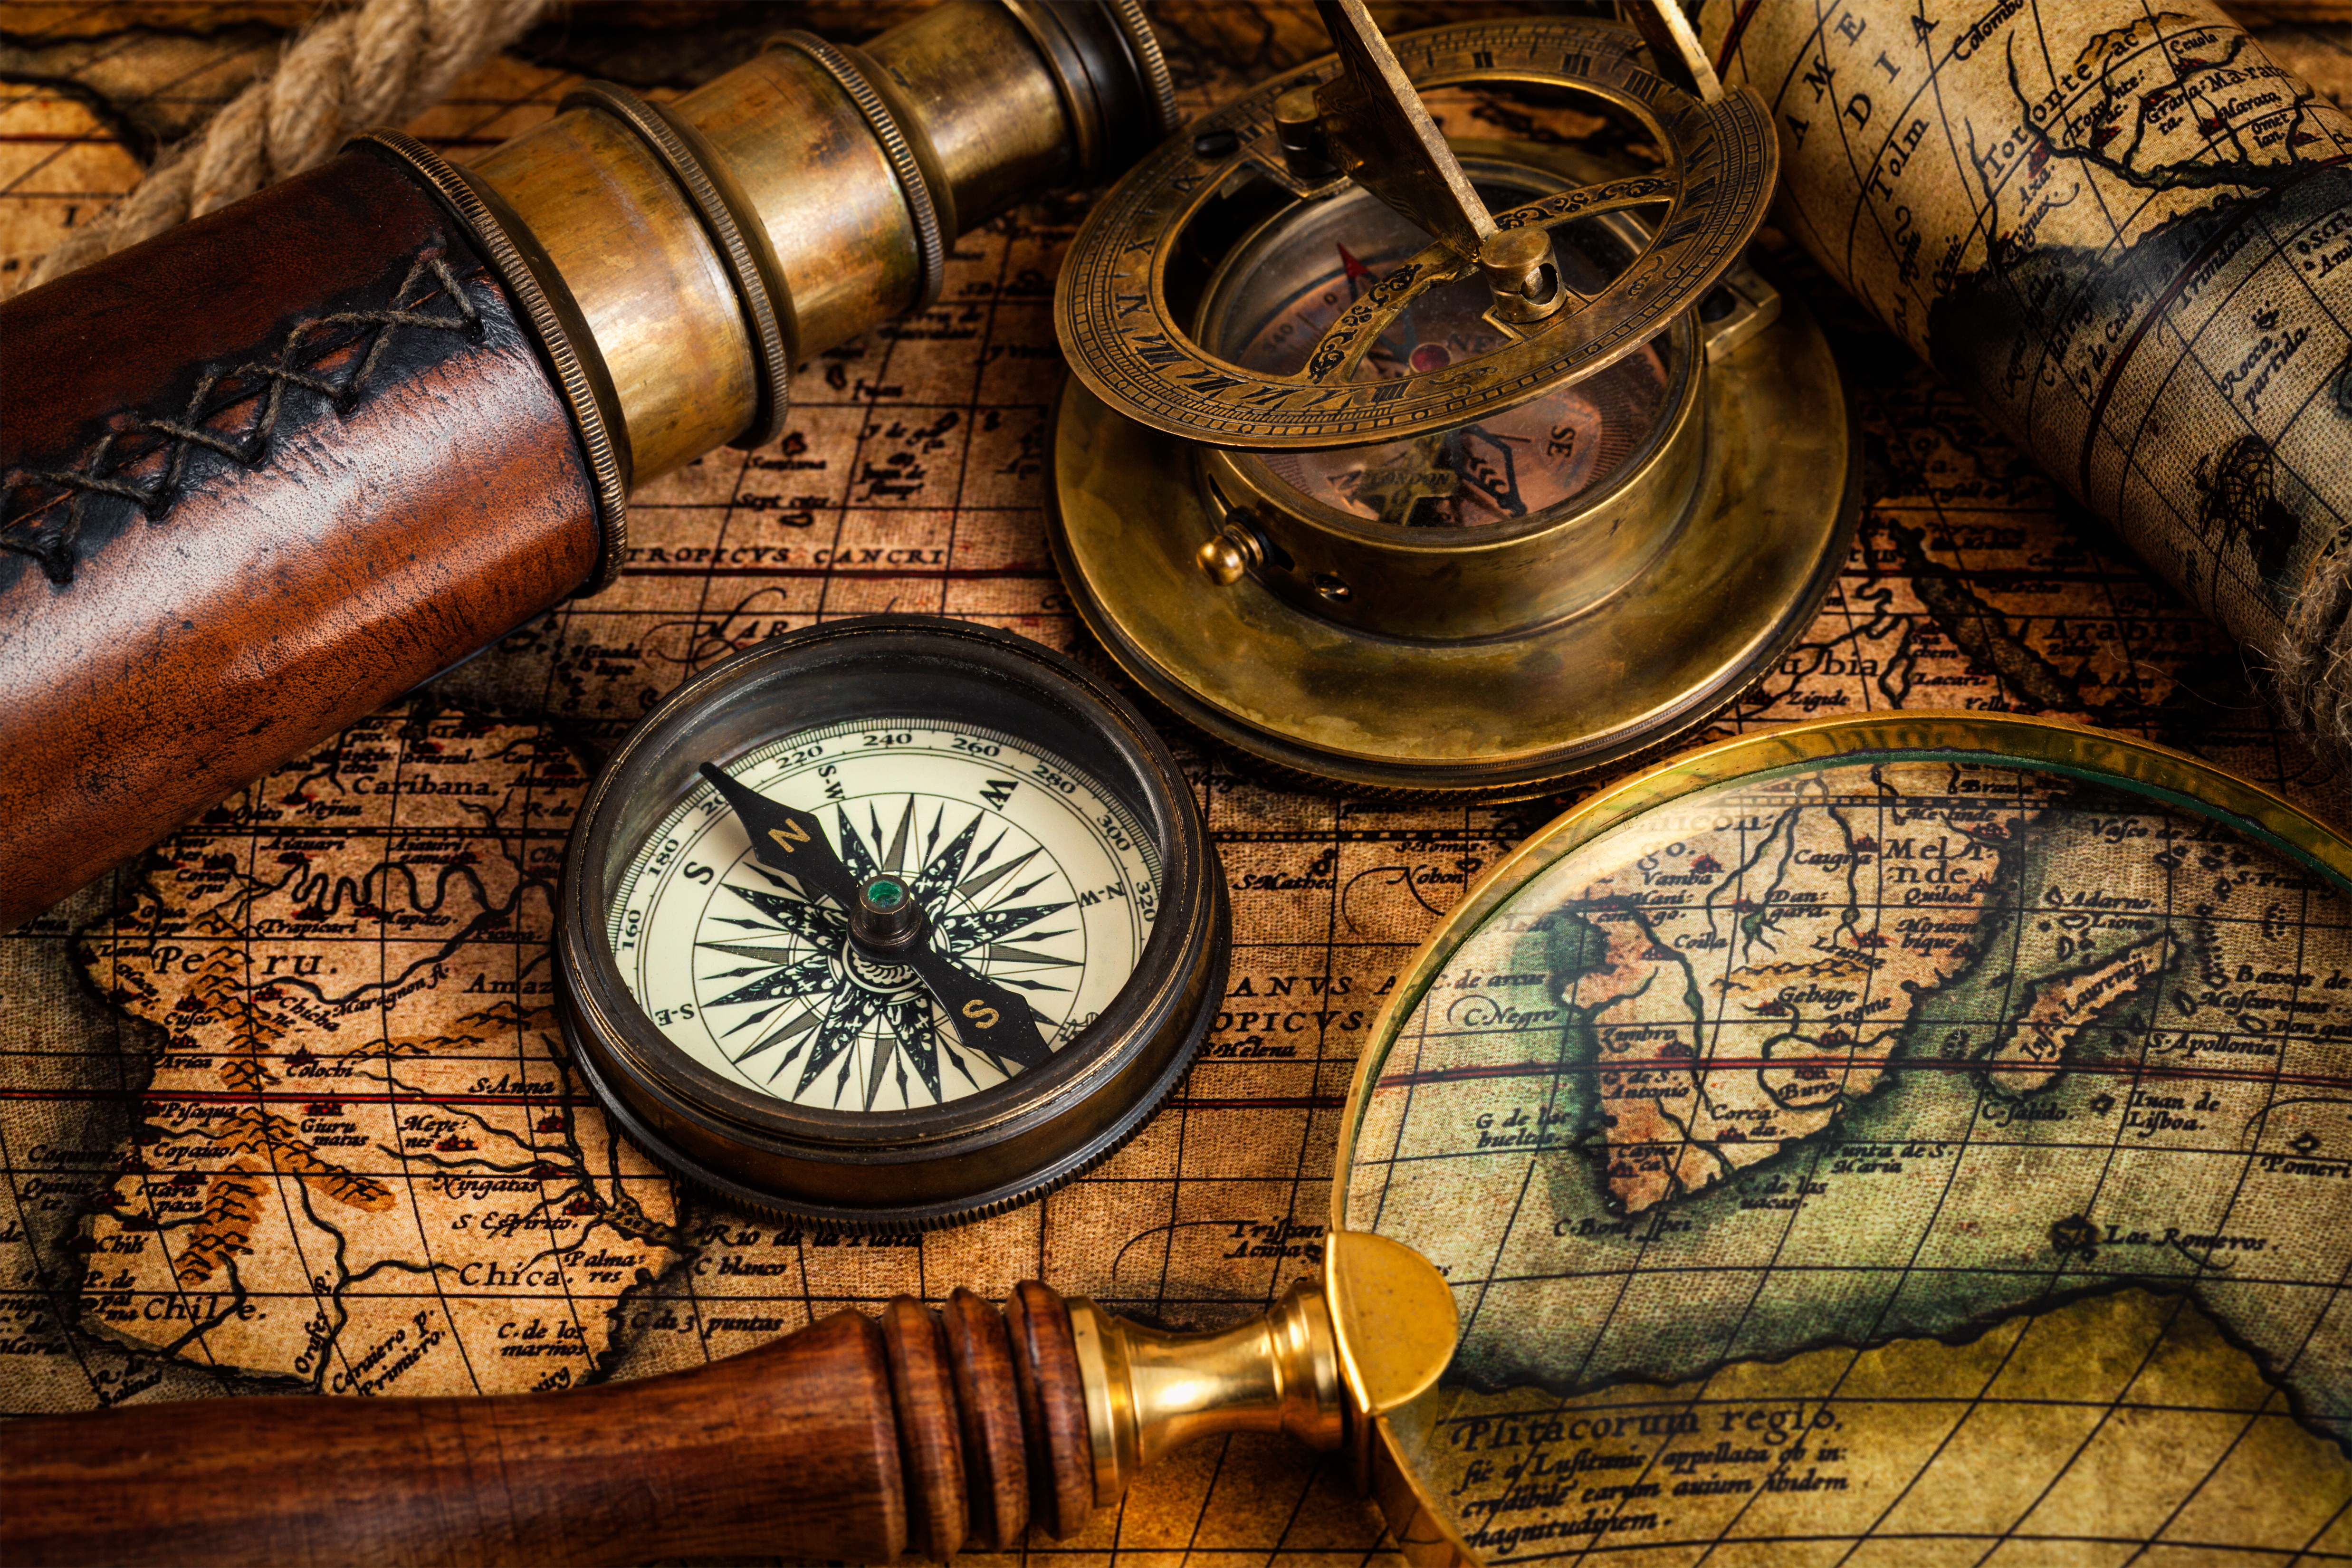 Old vintage compass and travel instruments on ancient map (iStock)